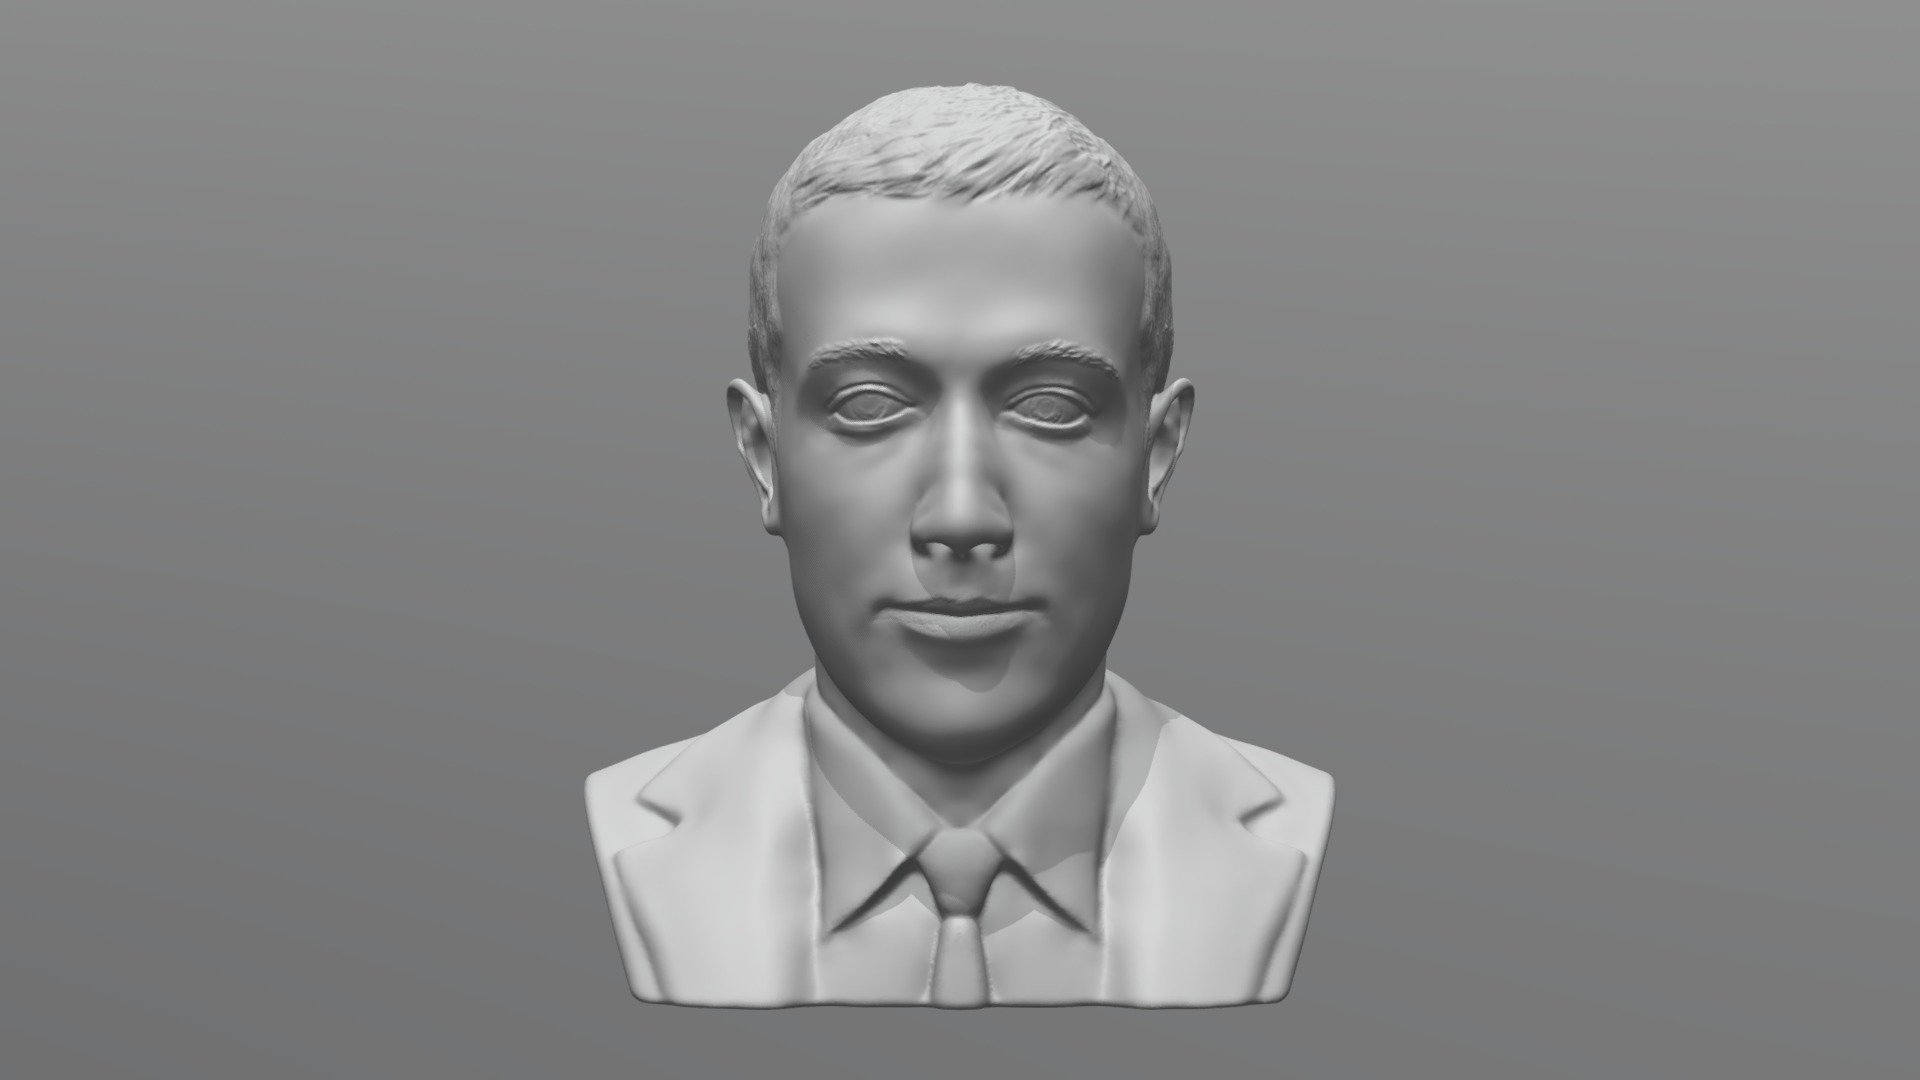 Here is Mark Zuckerberg bust 3D model ready for 3D printing. The model current size is 5 cm height, but you are free to scale it. 
Zip file contains stl. 
The model was created in ZBrush.

If you have any questions please don't hesitate to contact me. I will respond you ASAP. 
I encourage you to check my other celebrity 3D models 3d model